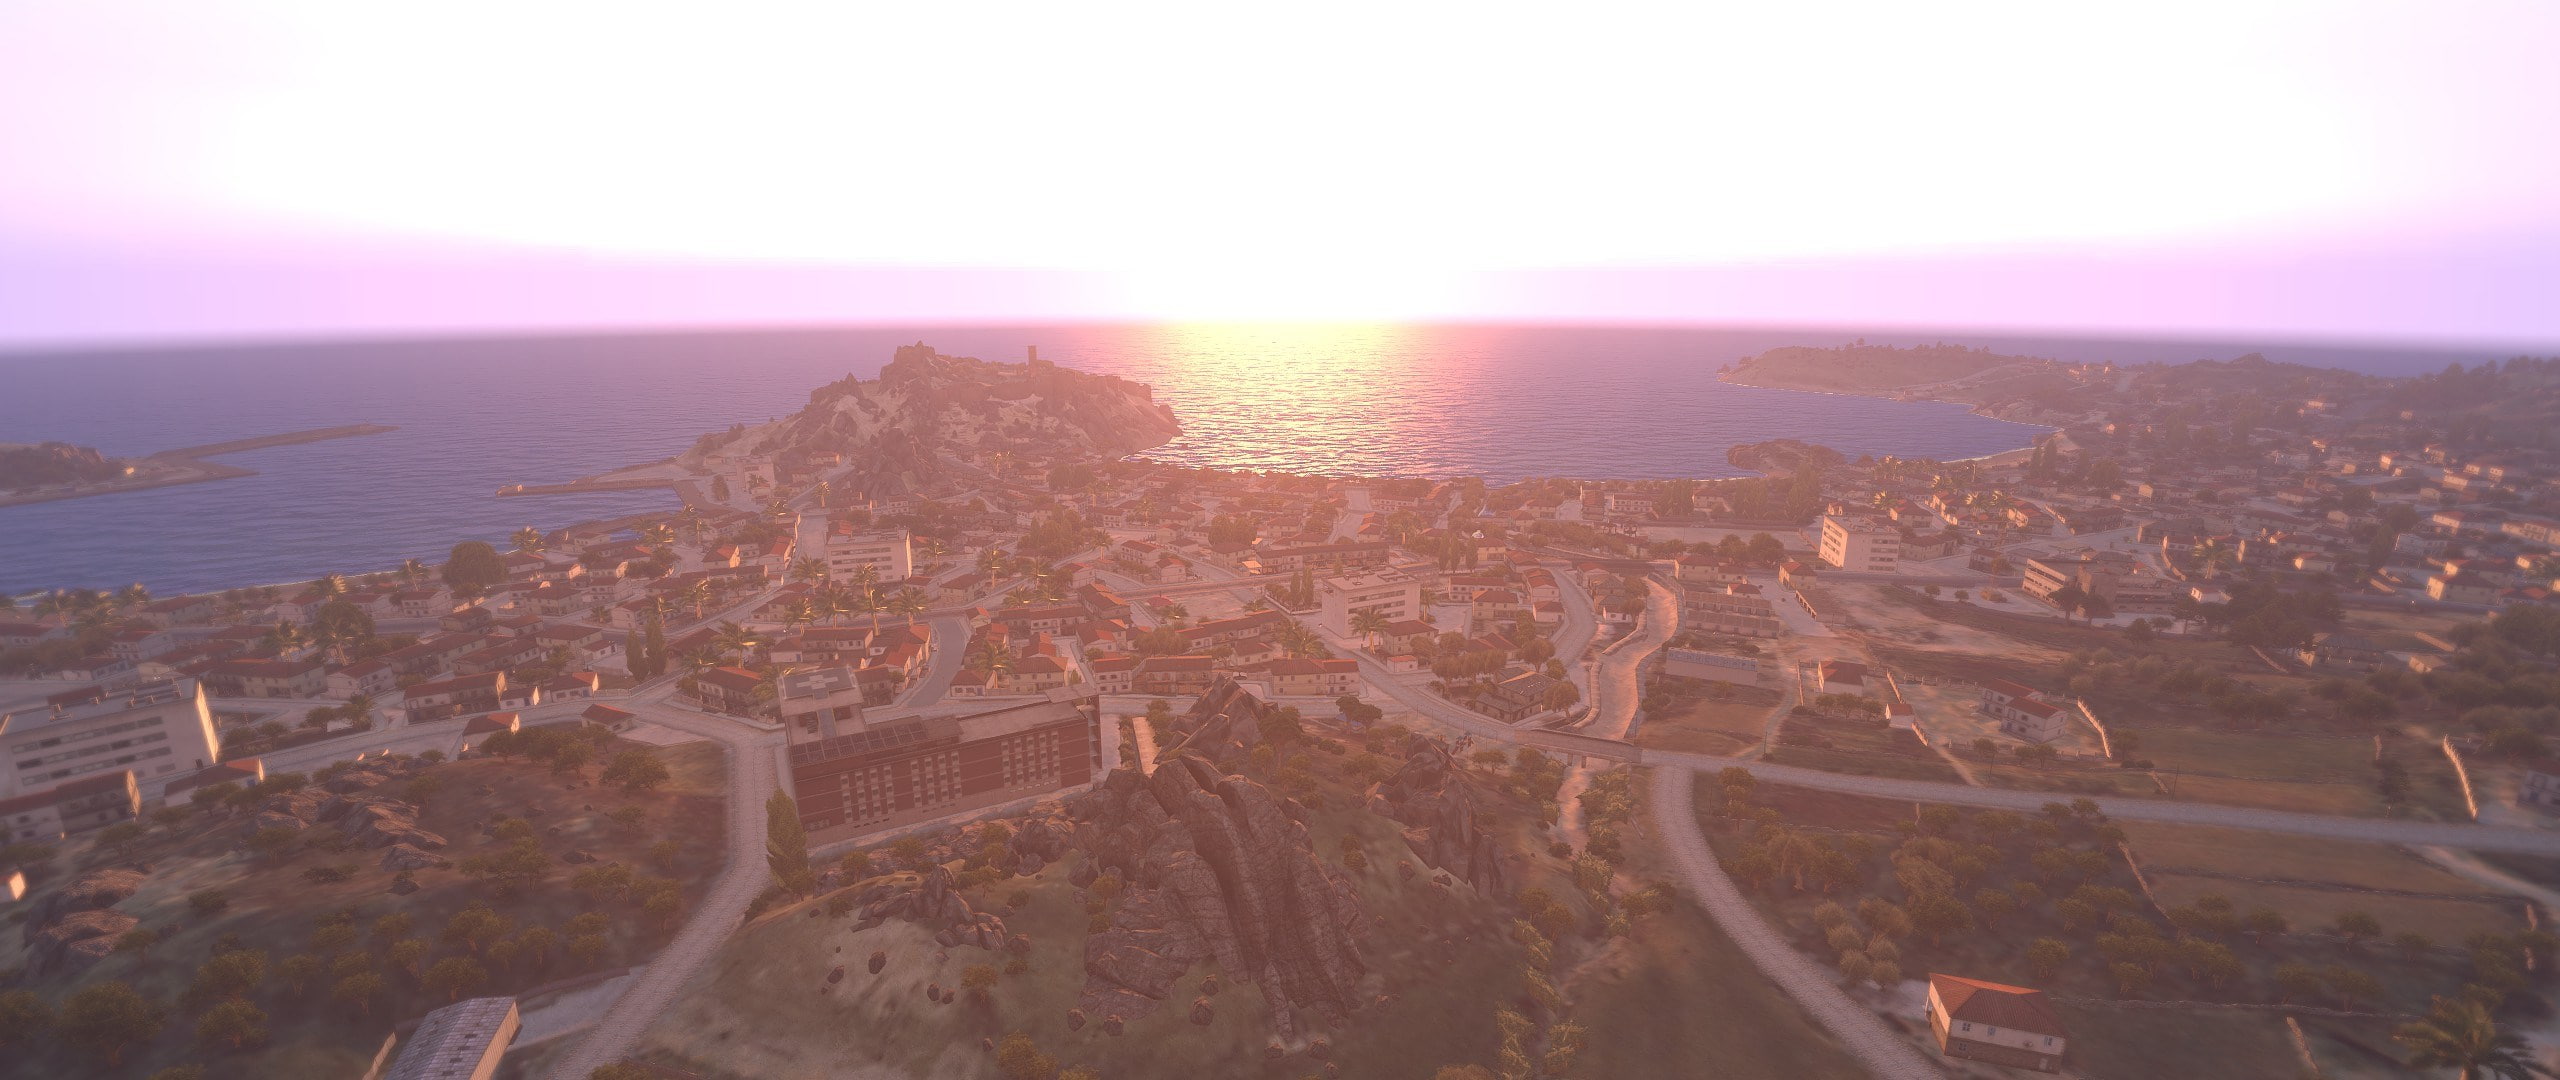 arma 3, architecture, high angle view, nature, built structure